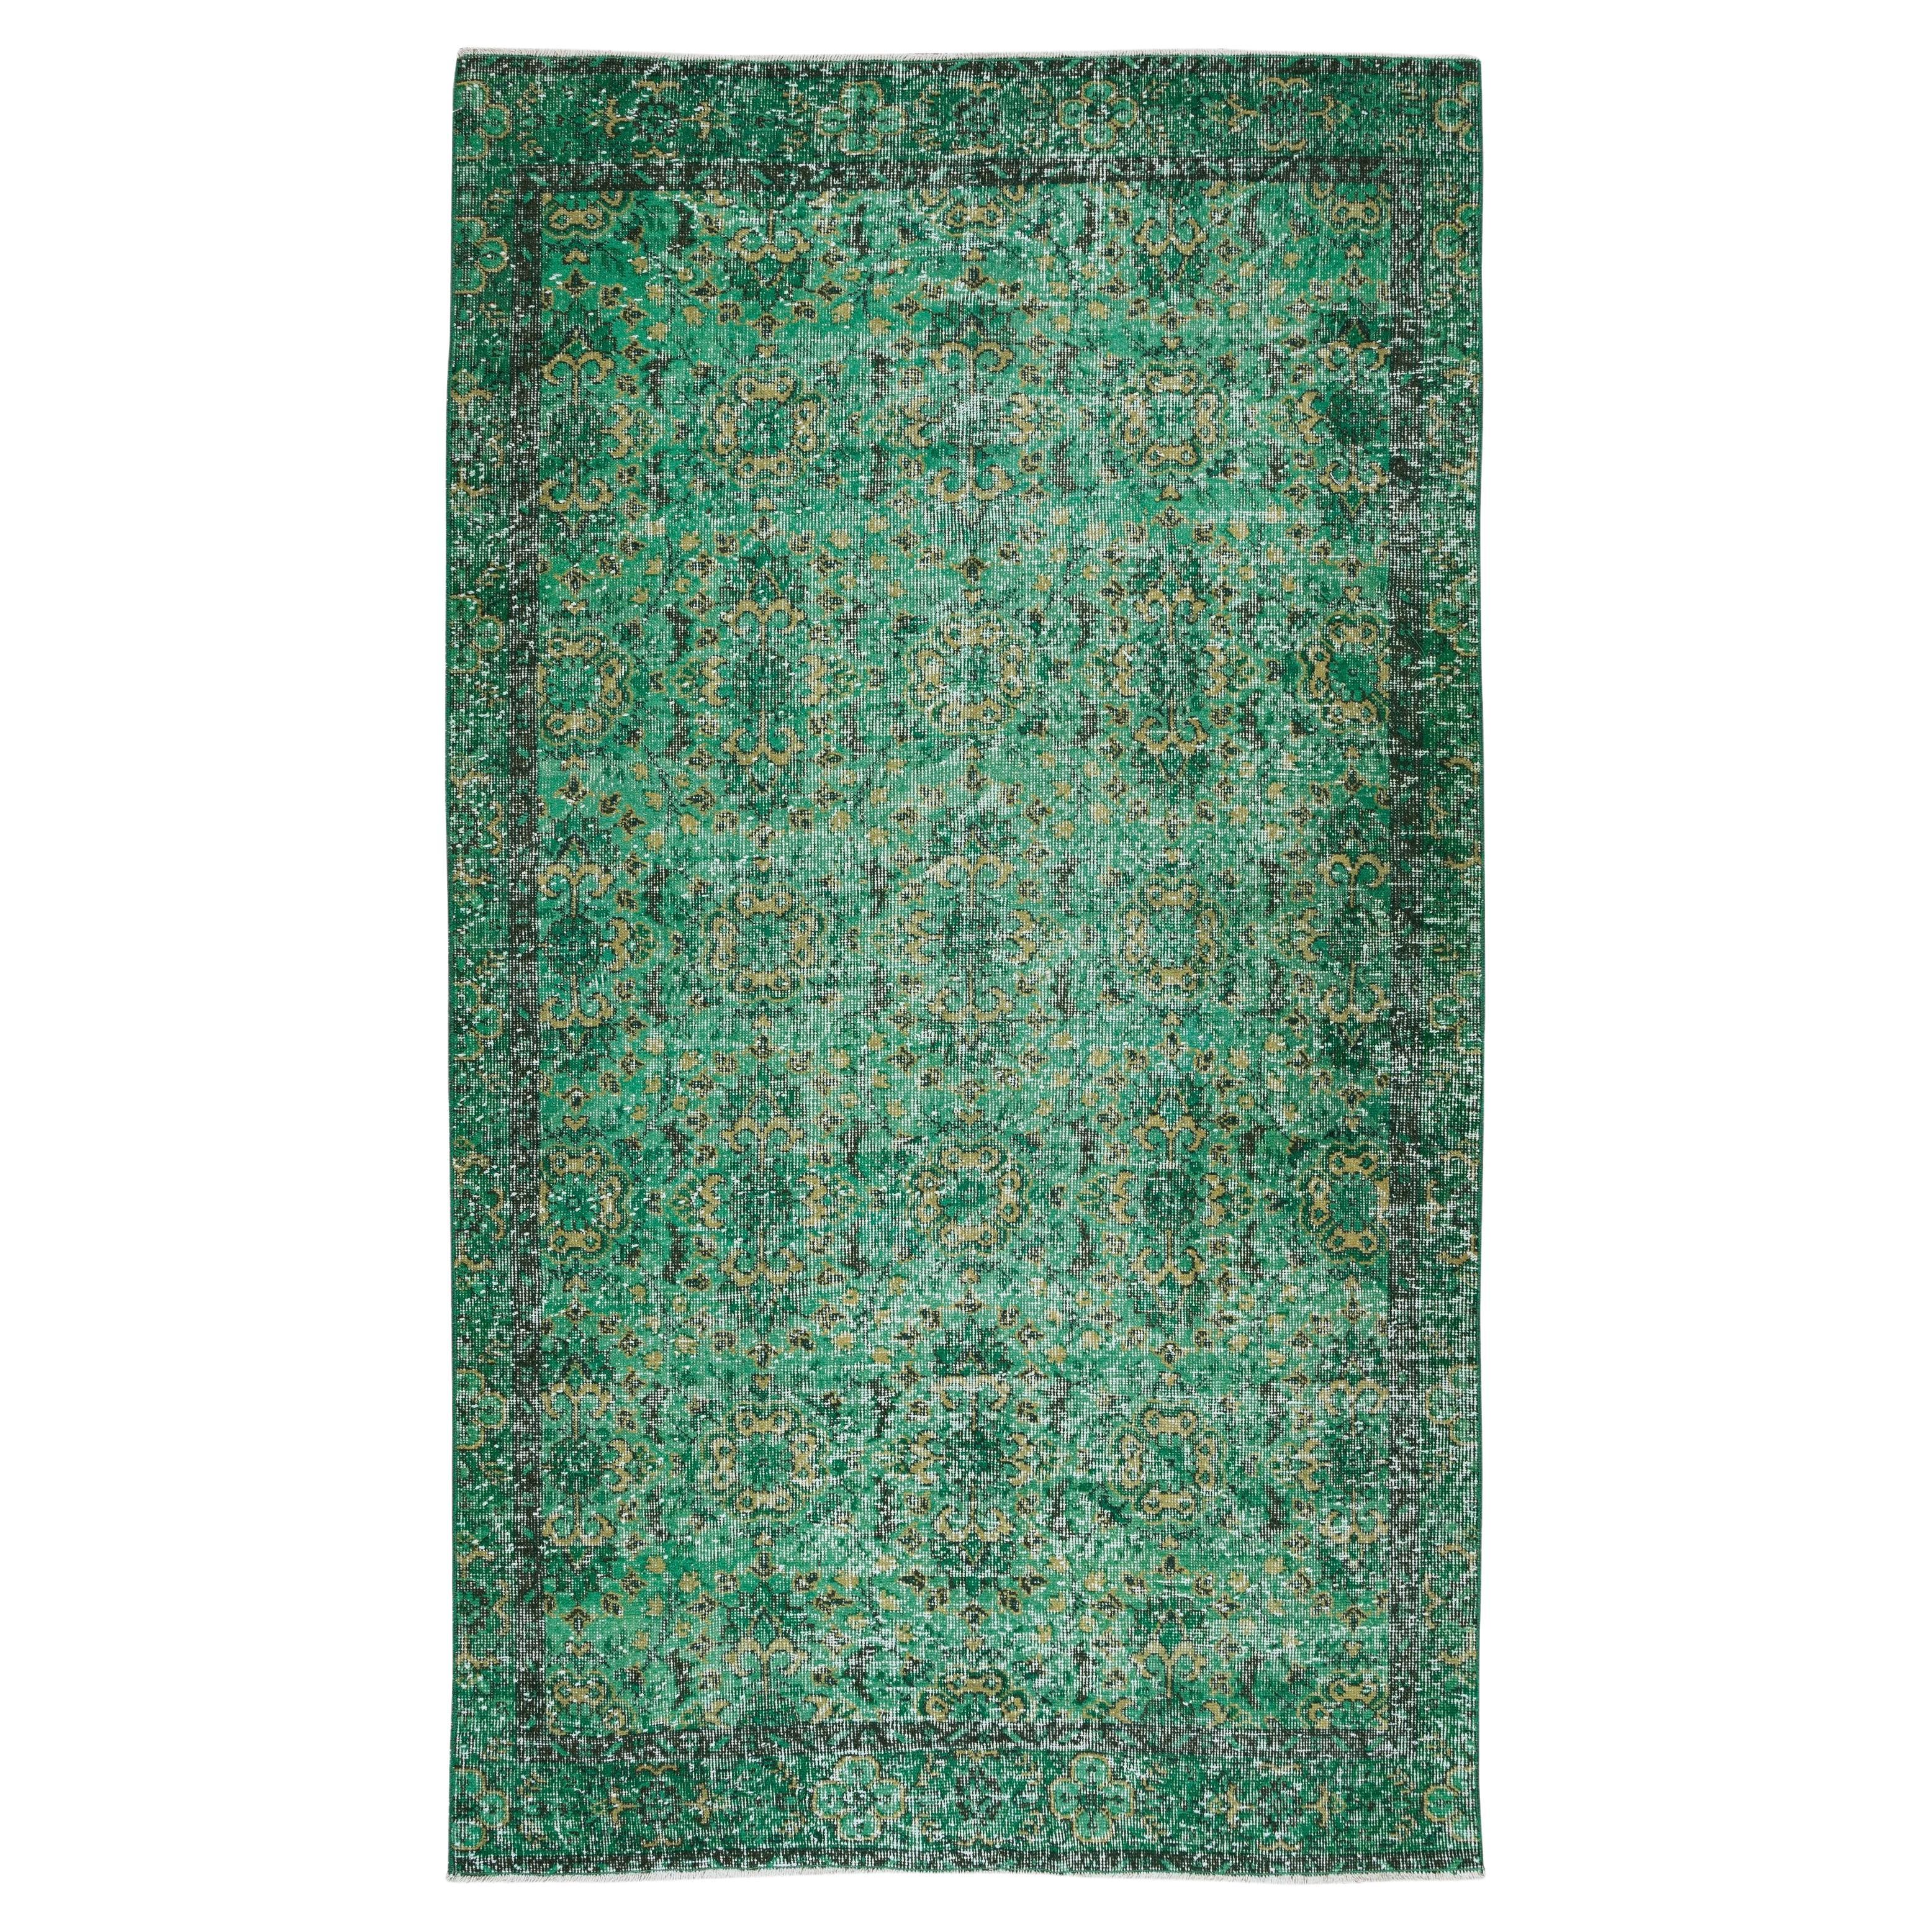 5.3x9.4 Ft Vintage Handmade Turkish Rug Over-Dyed in Green for Modern Interiors